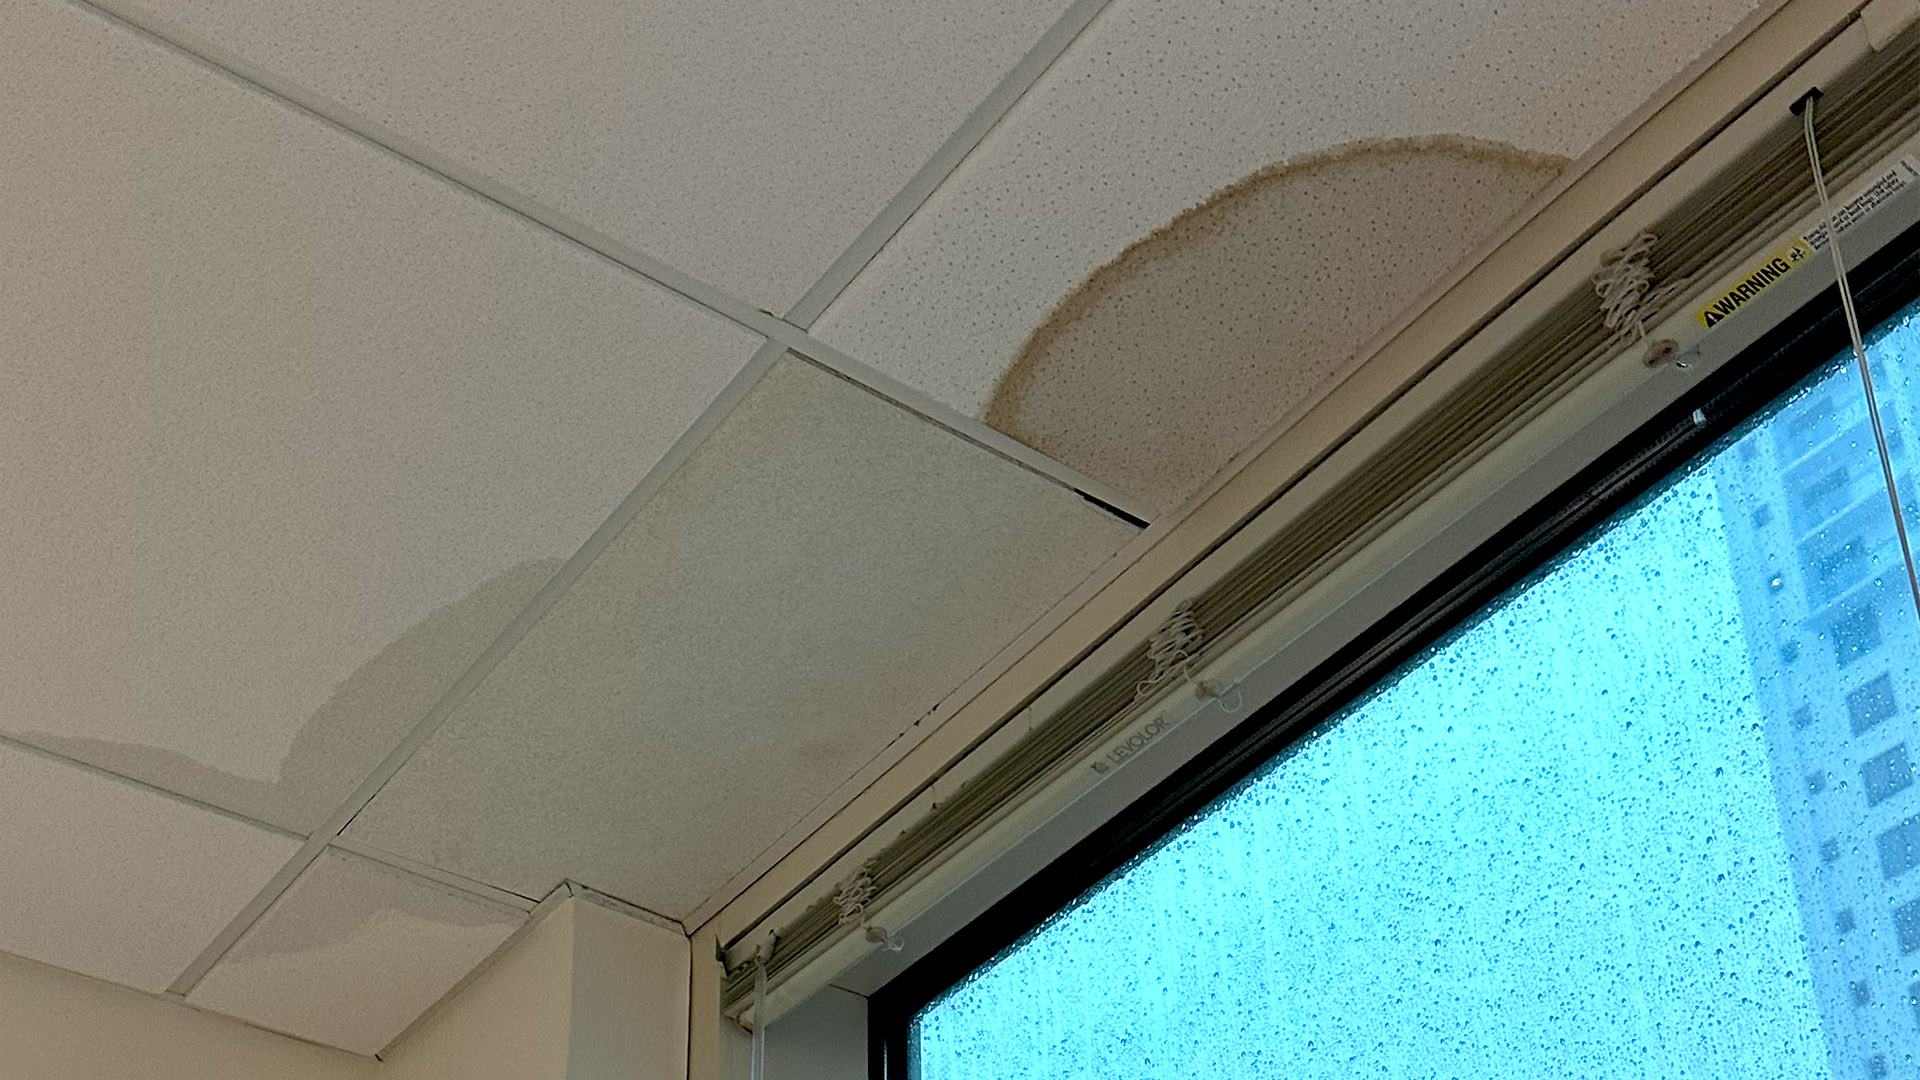 Commercial Office Ceiling Leak and Water Stain After Hurricane